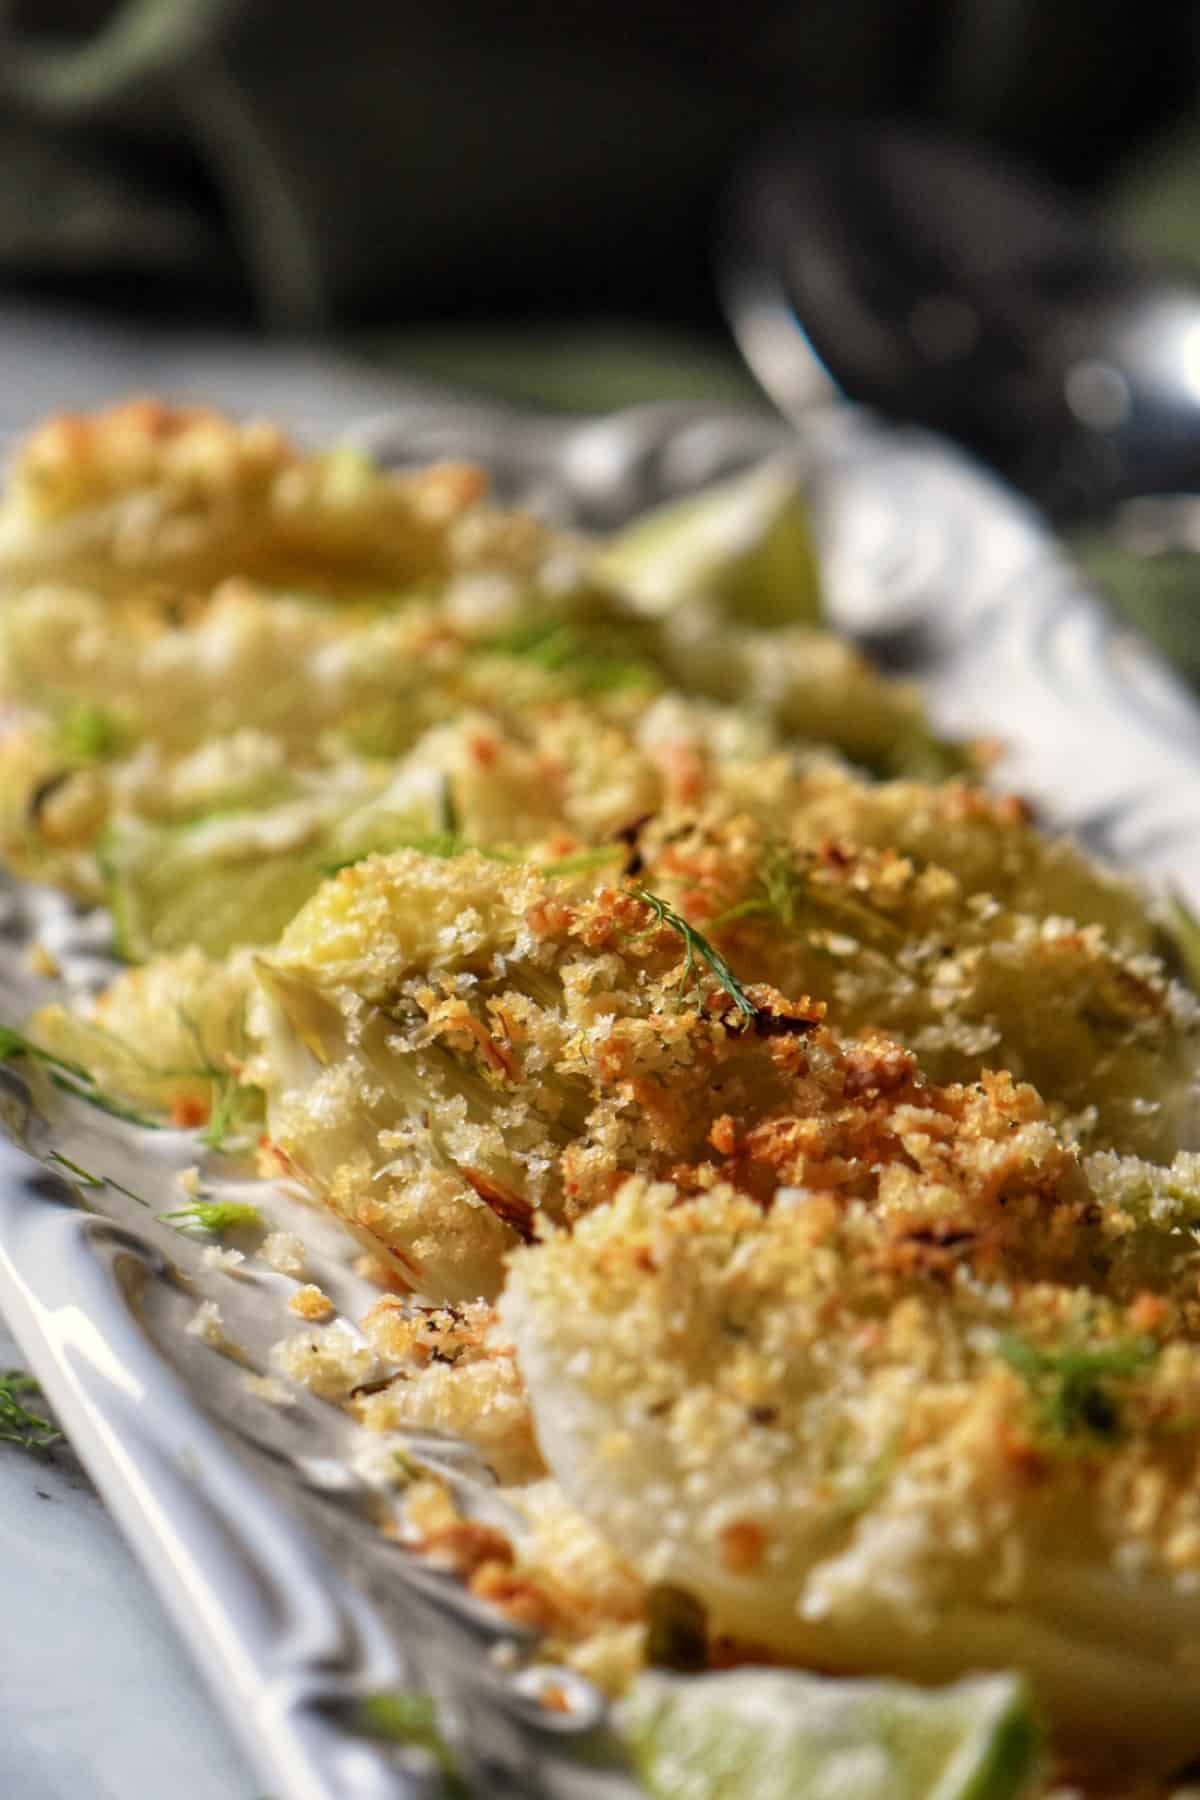 Roasted Fennel topped with crispy Panko bread crumbs.